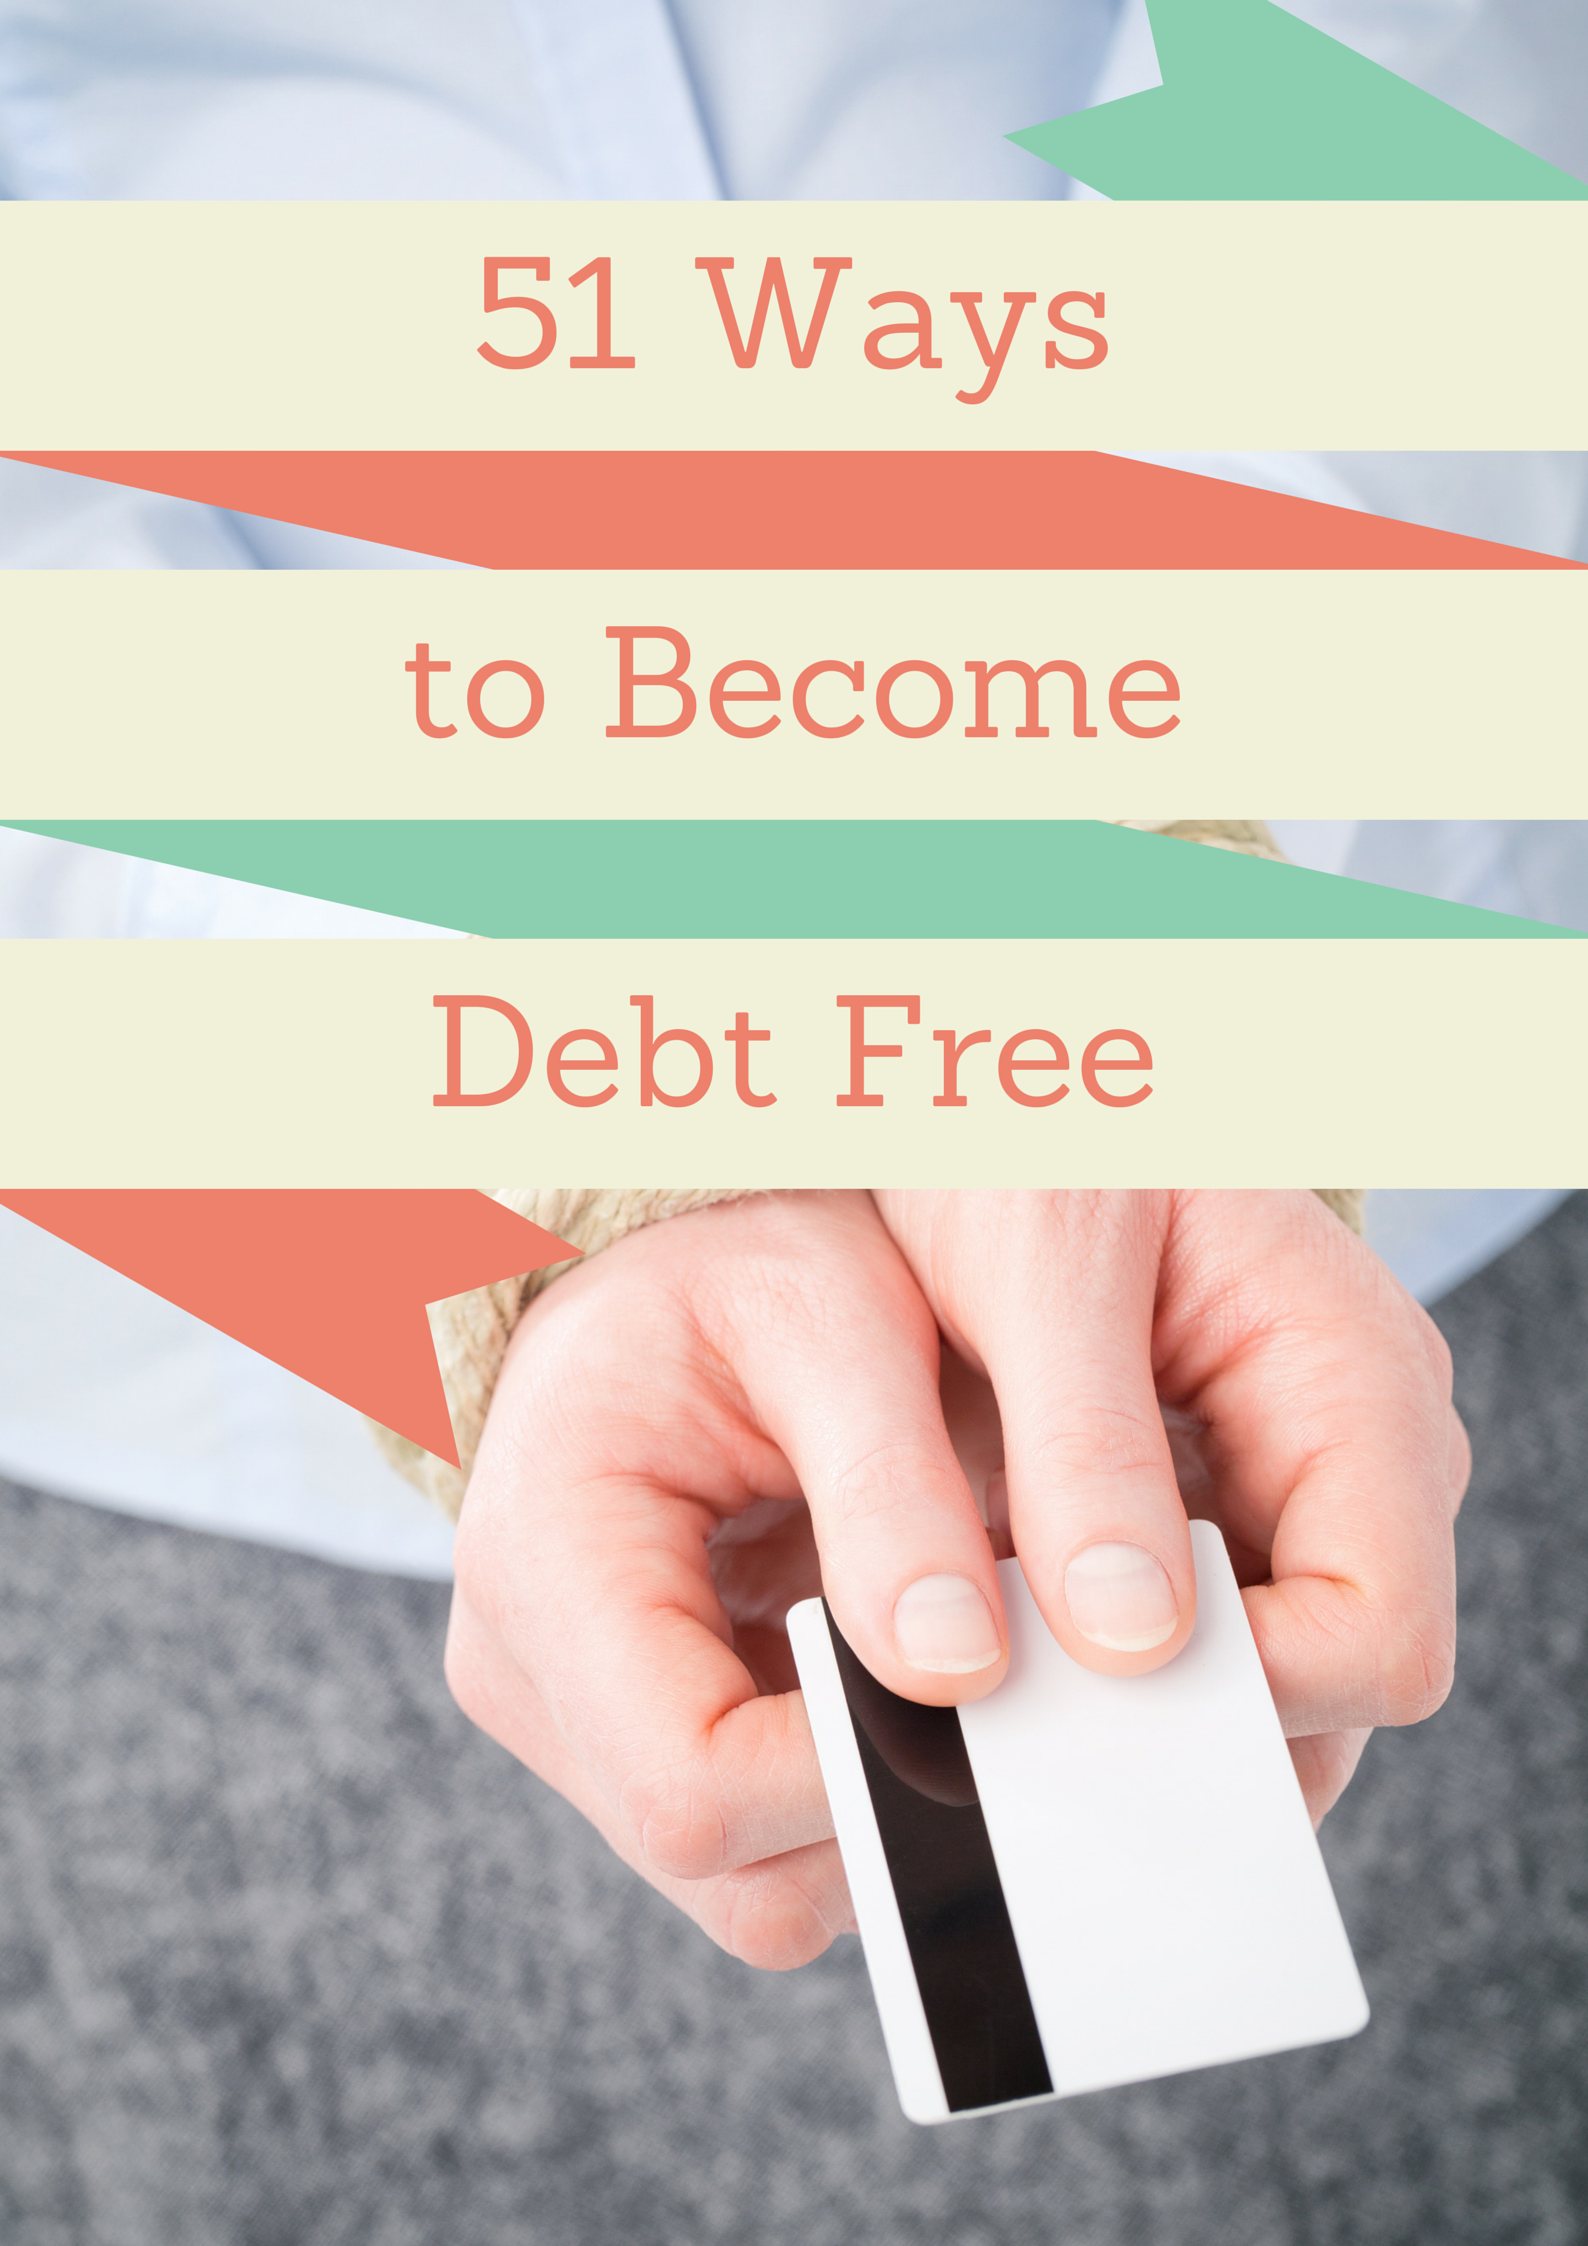 51 Ways to become debt free